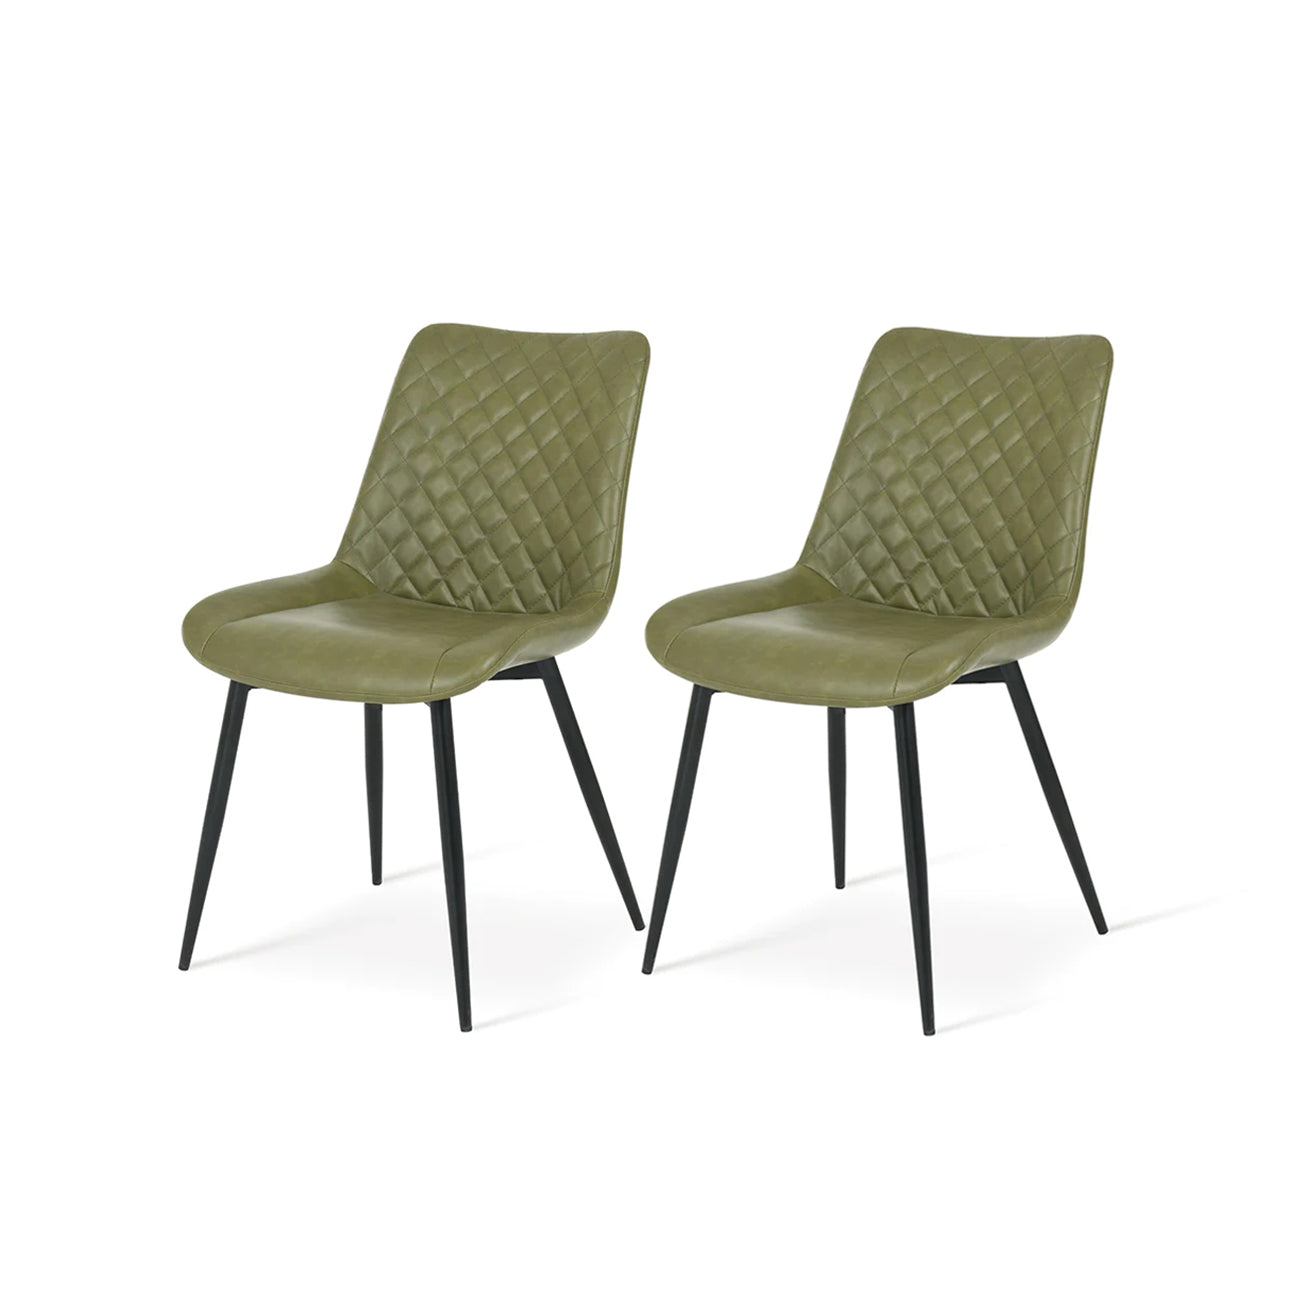 Finley Dining Chairs [Set of 2] [Pu Leather] [Olive Green]